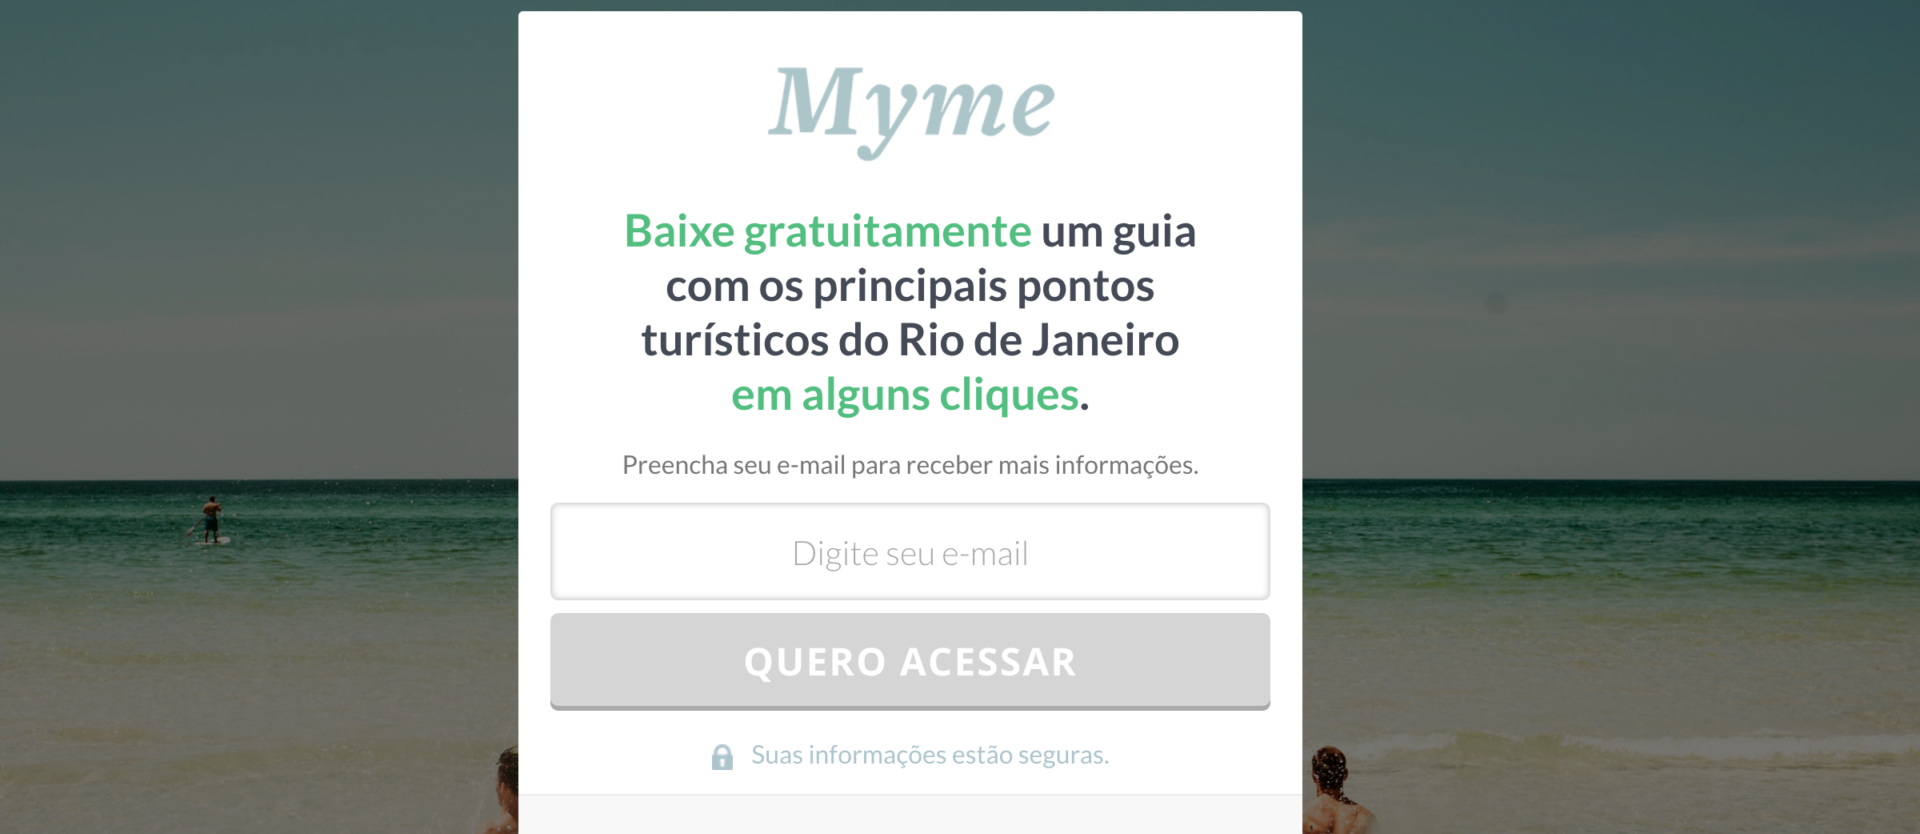 myme - cliente stays